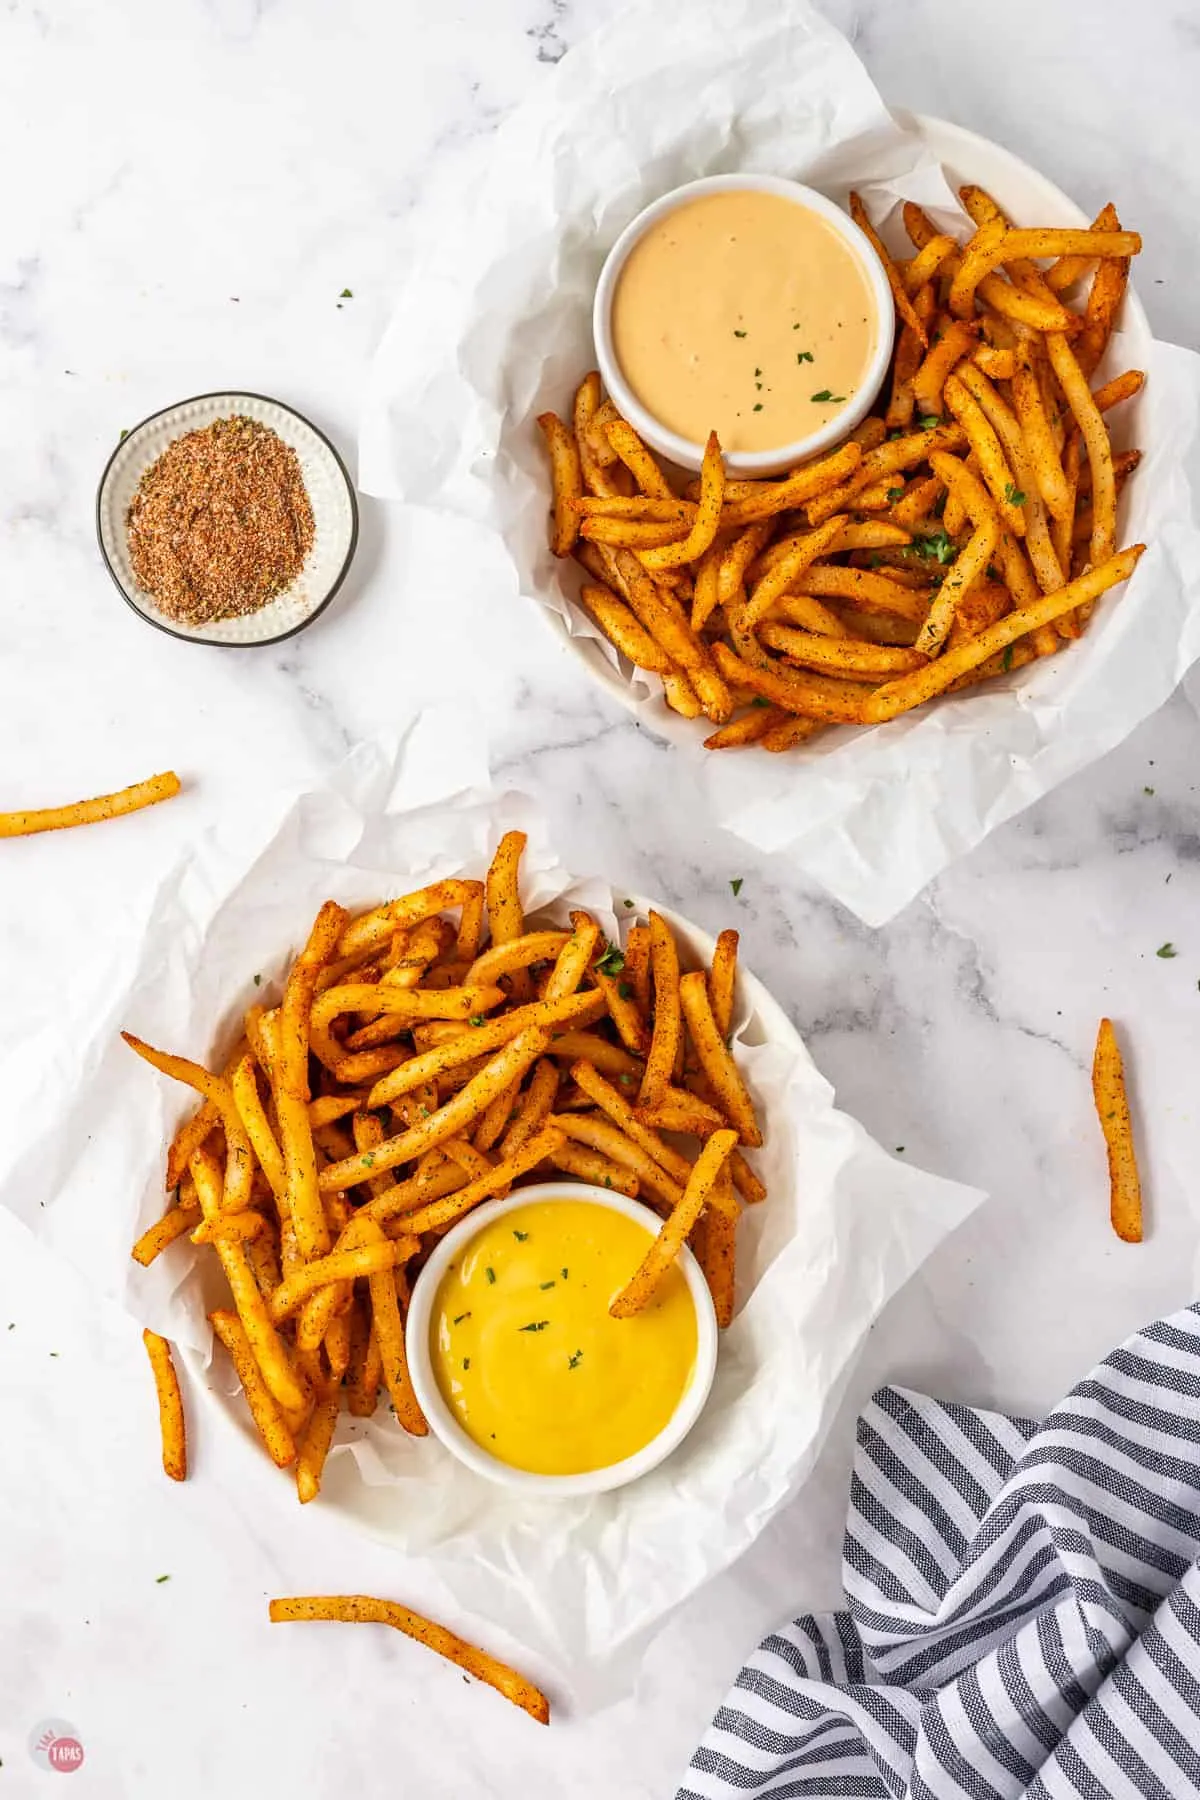 two bowls of french fries